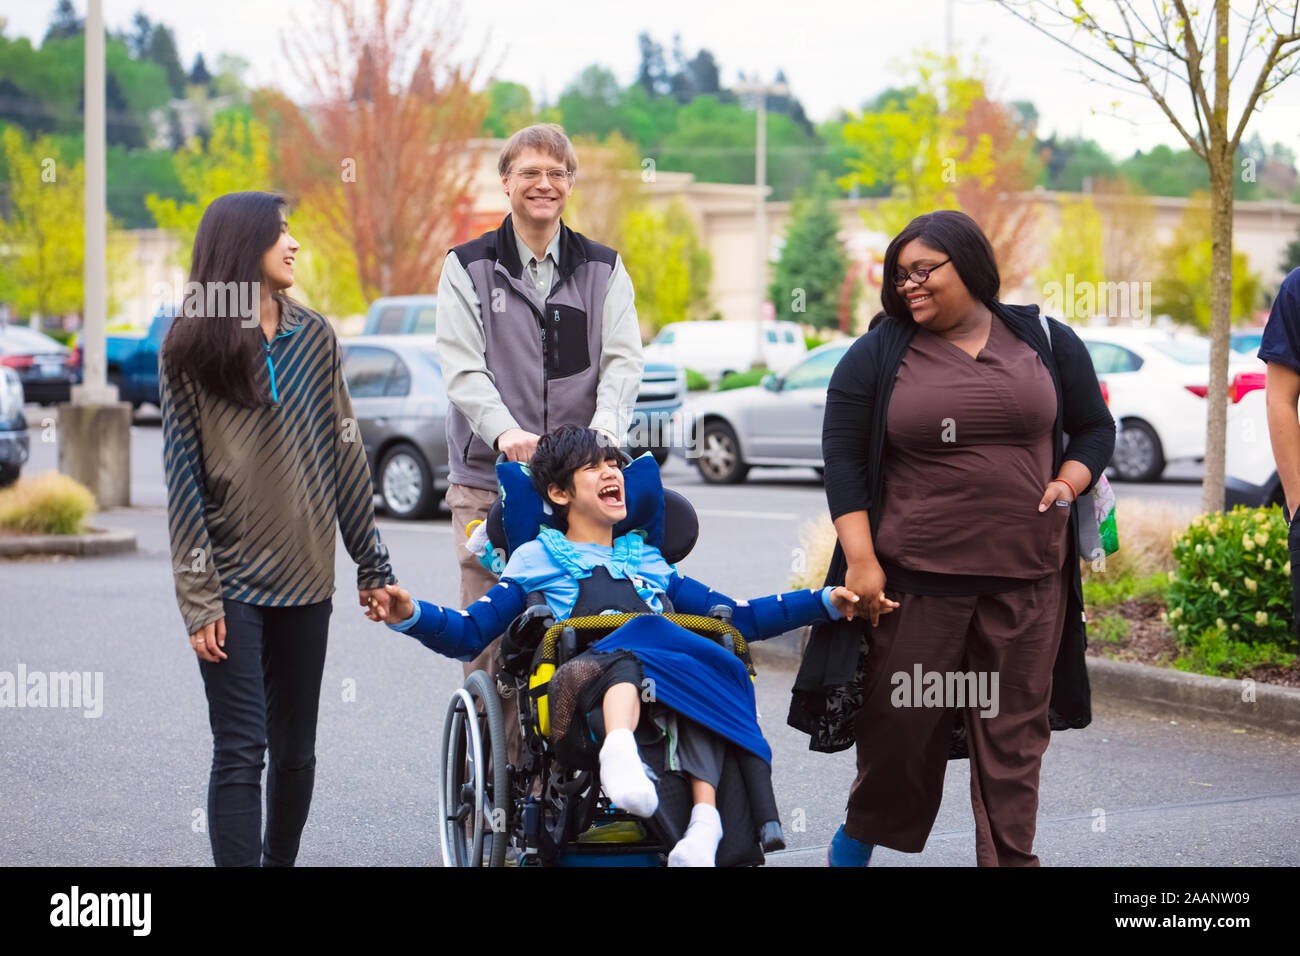 Disabled biracial boy in wheelchair walking along city street with father, siblings and caregiver, holding hands Stock Photo